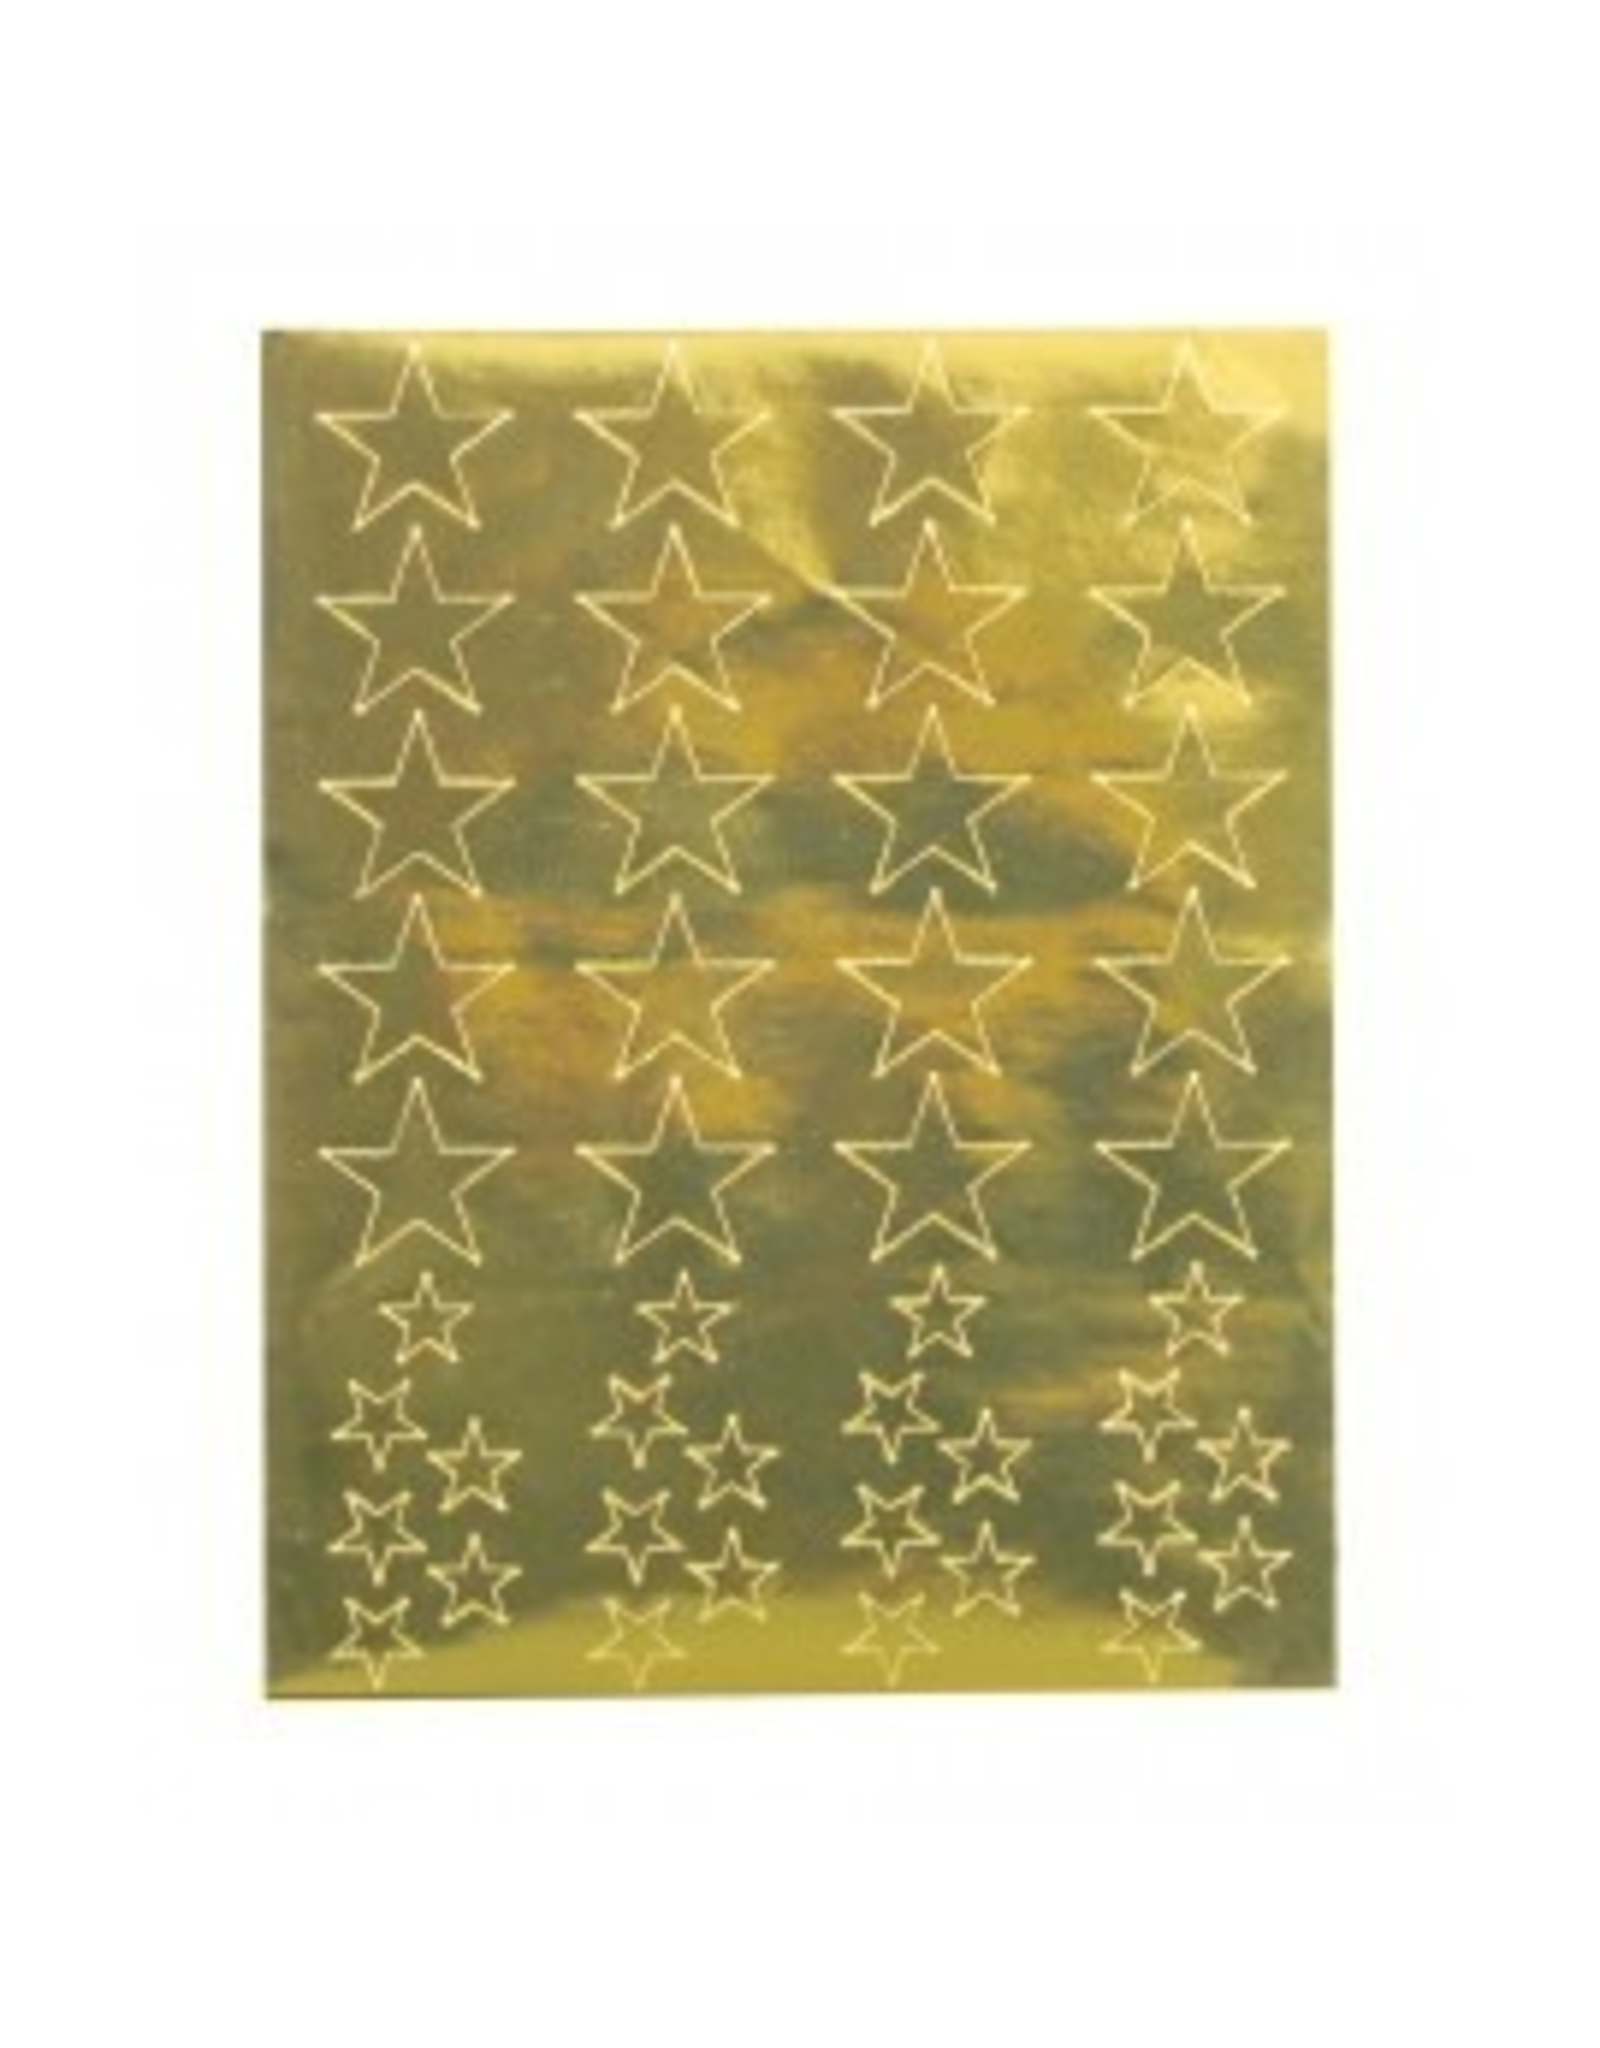 STICKER FORMS - GOLD STARS 20sheets